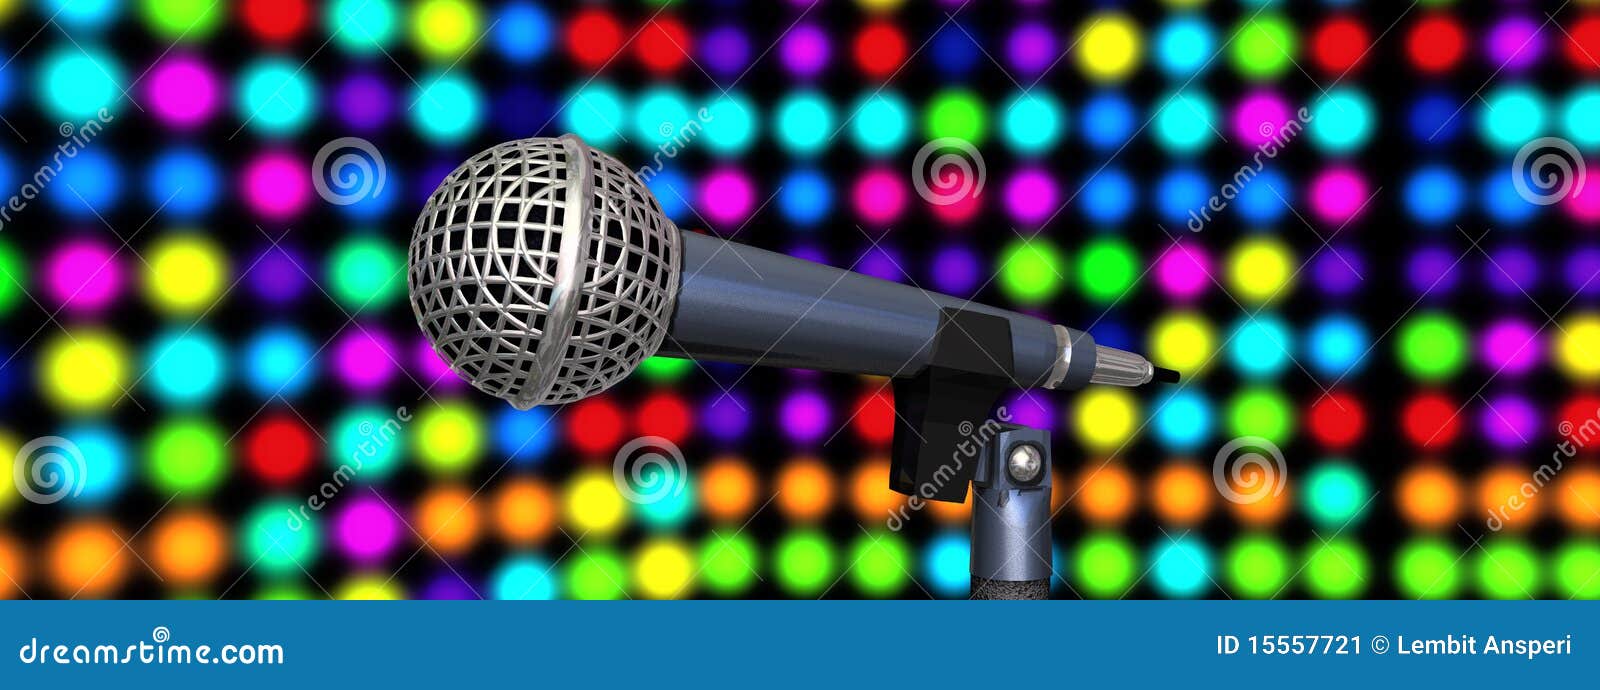 Microphone on stage stock illustration. Illustration of performing